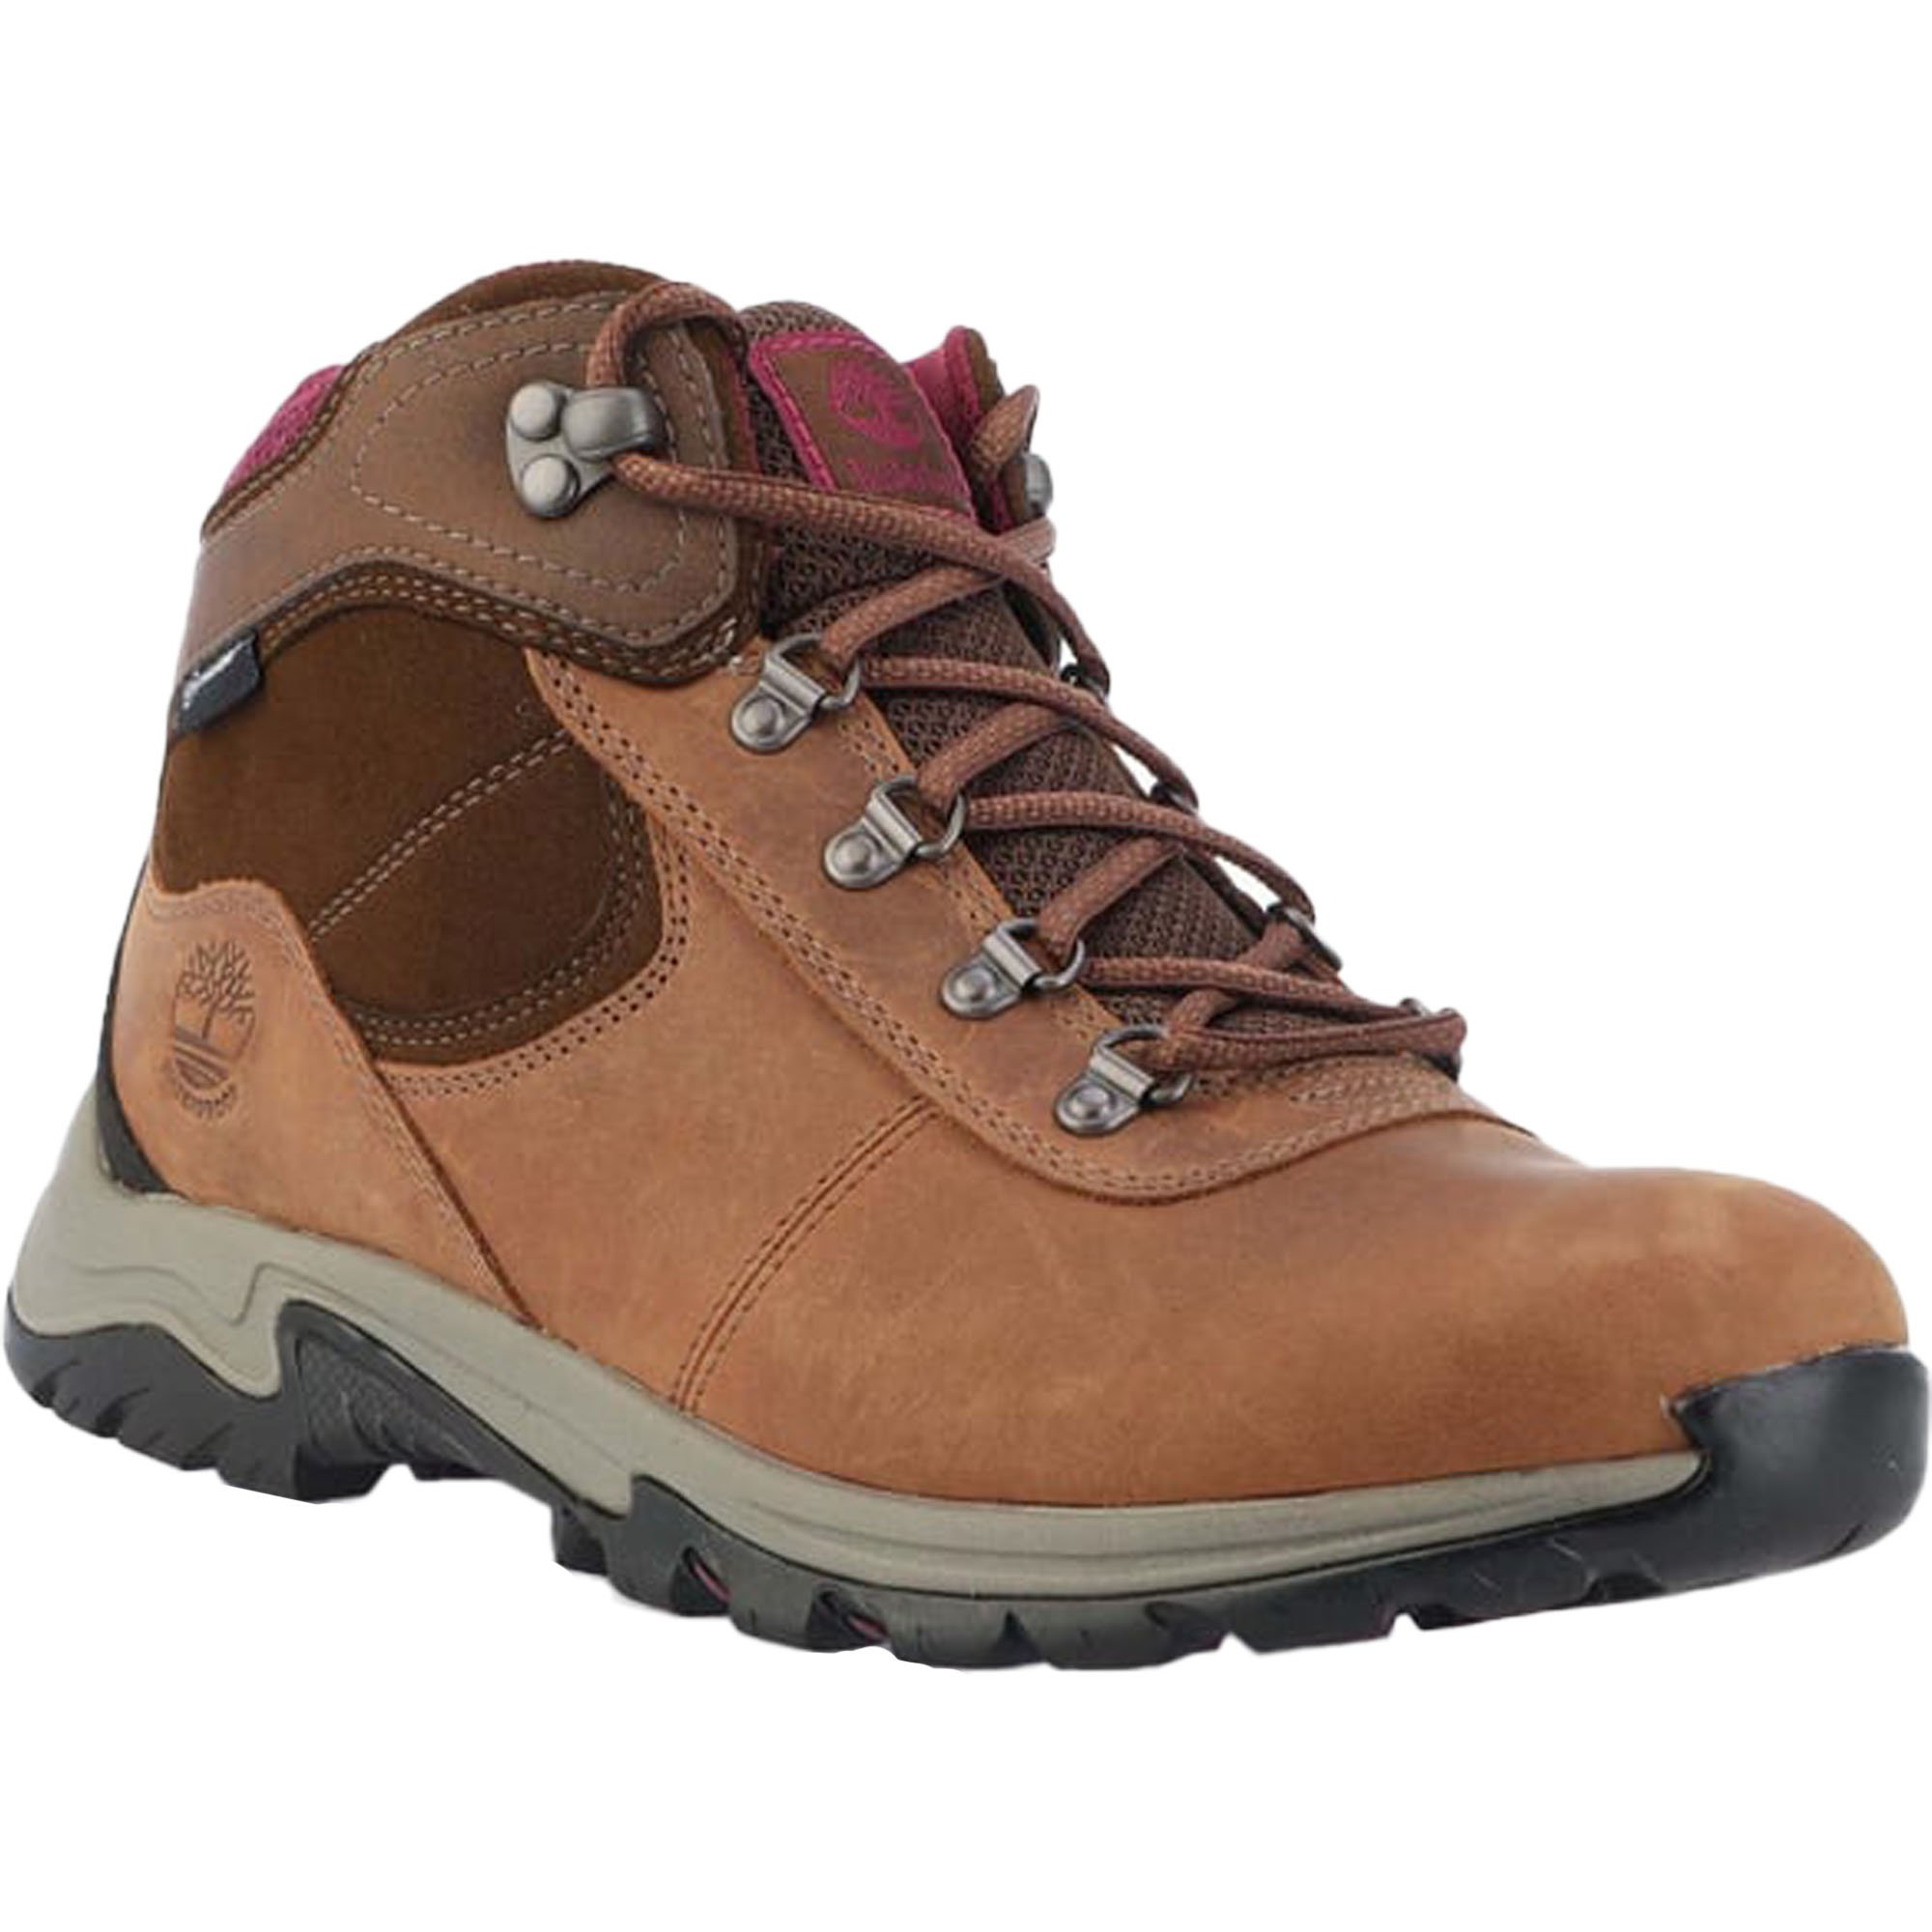 Timberland Mt. Maddsen Mid LTHR WP Women's Hiking Boots